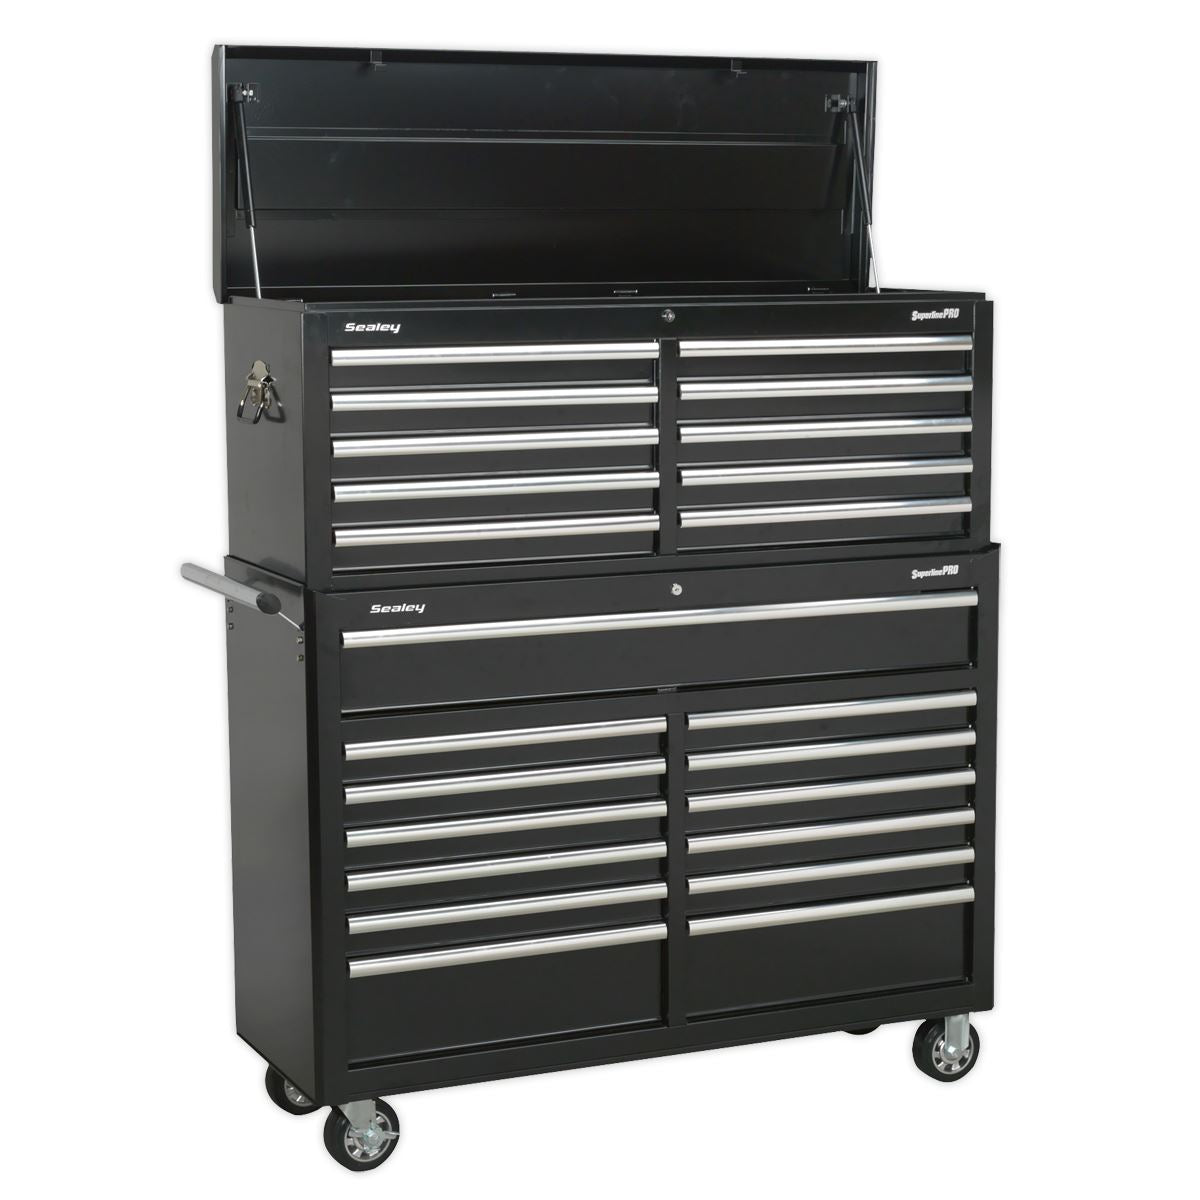 Sealey Superline Pro Tool Chest Combination 23 Drawer with Ball-Bearing Slides - Black